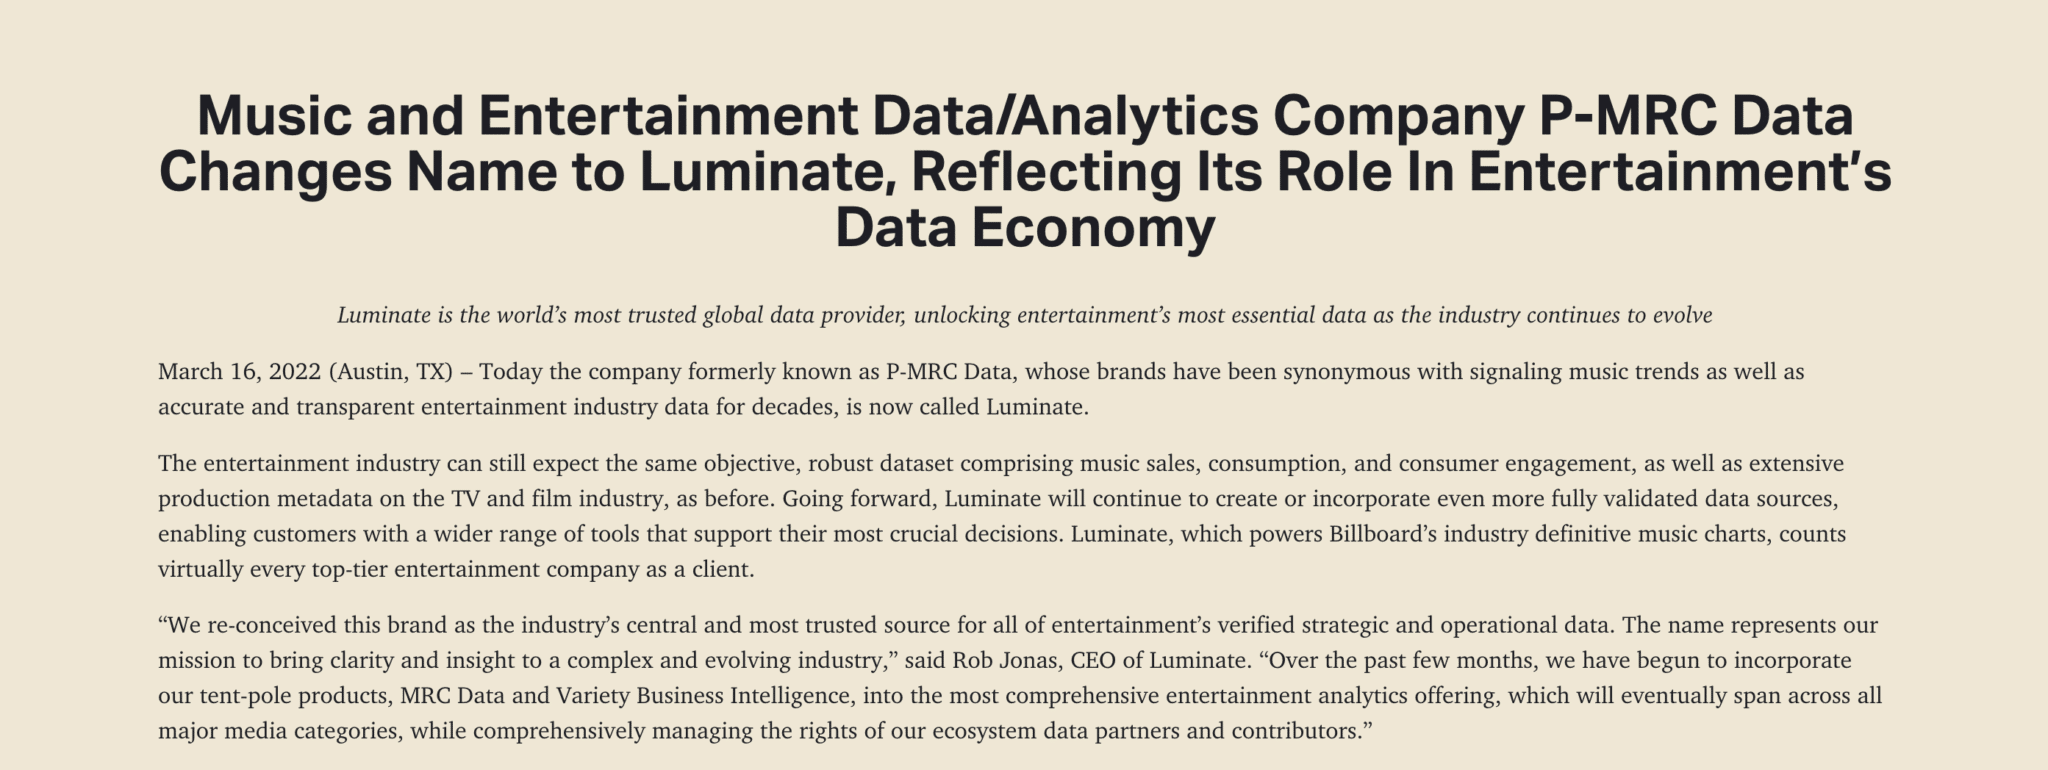 Music and Entertainment Data/Analytics Company P-MRC Data Changes Name to Luminate, Reflecting Its Role In Entertainment’s Data Economy